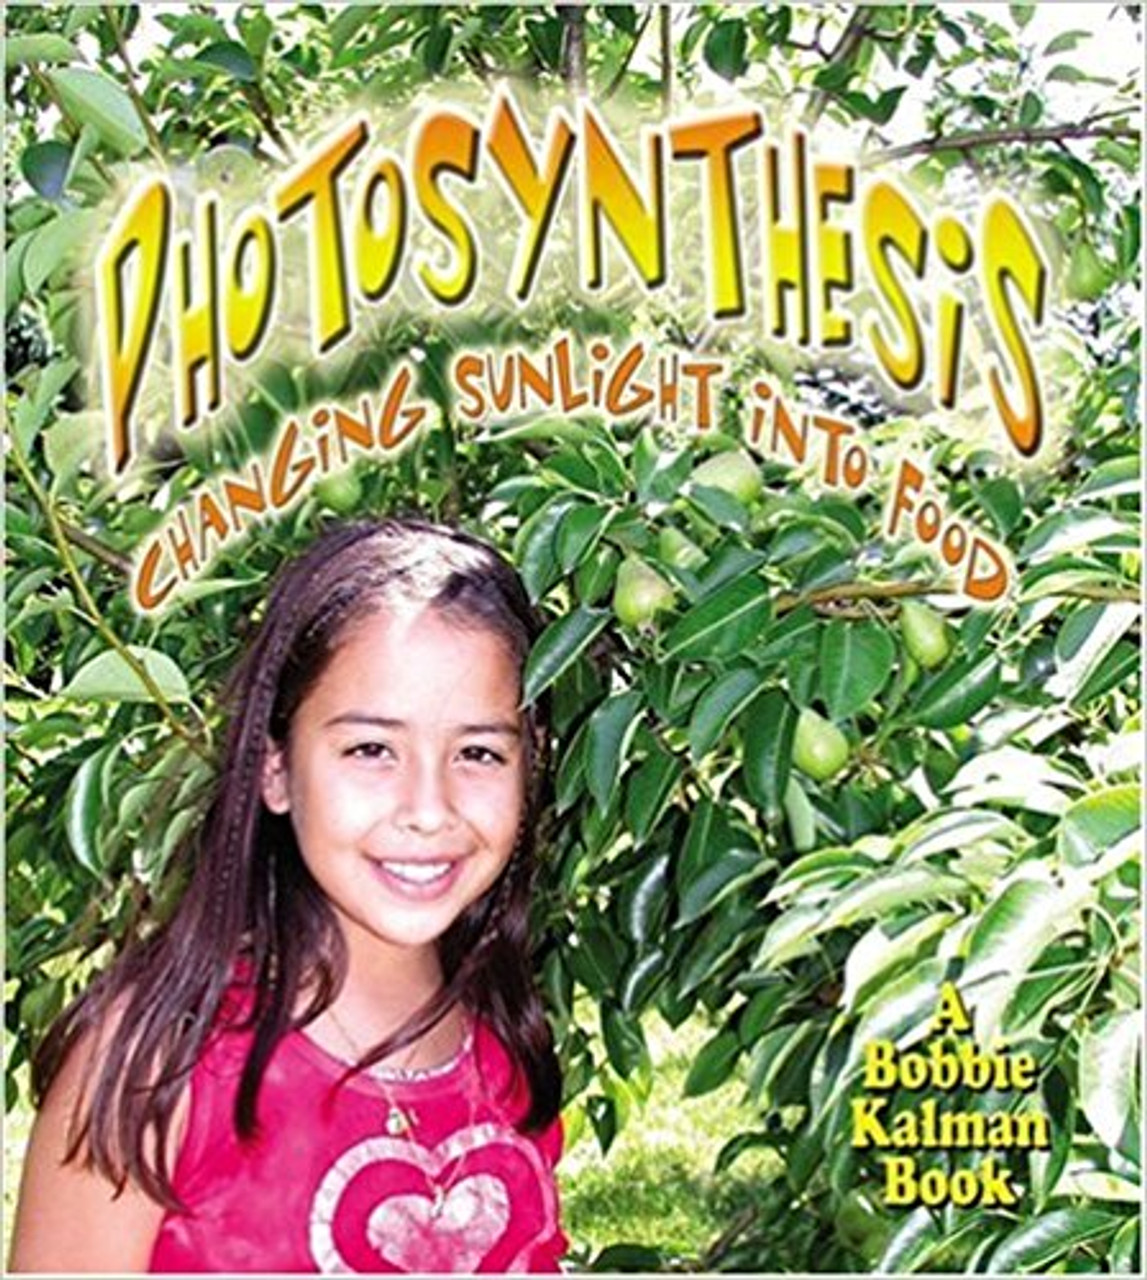 Photosynthesis: Changing Sunlight into Food (Paperback) by Bobbie Kalman